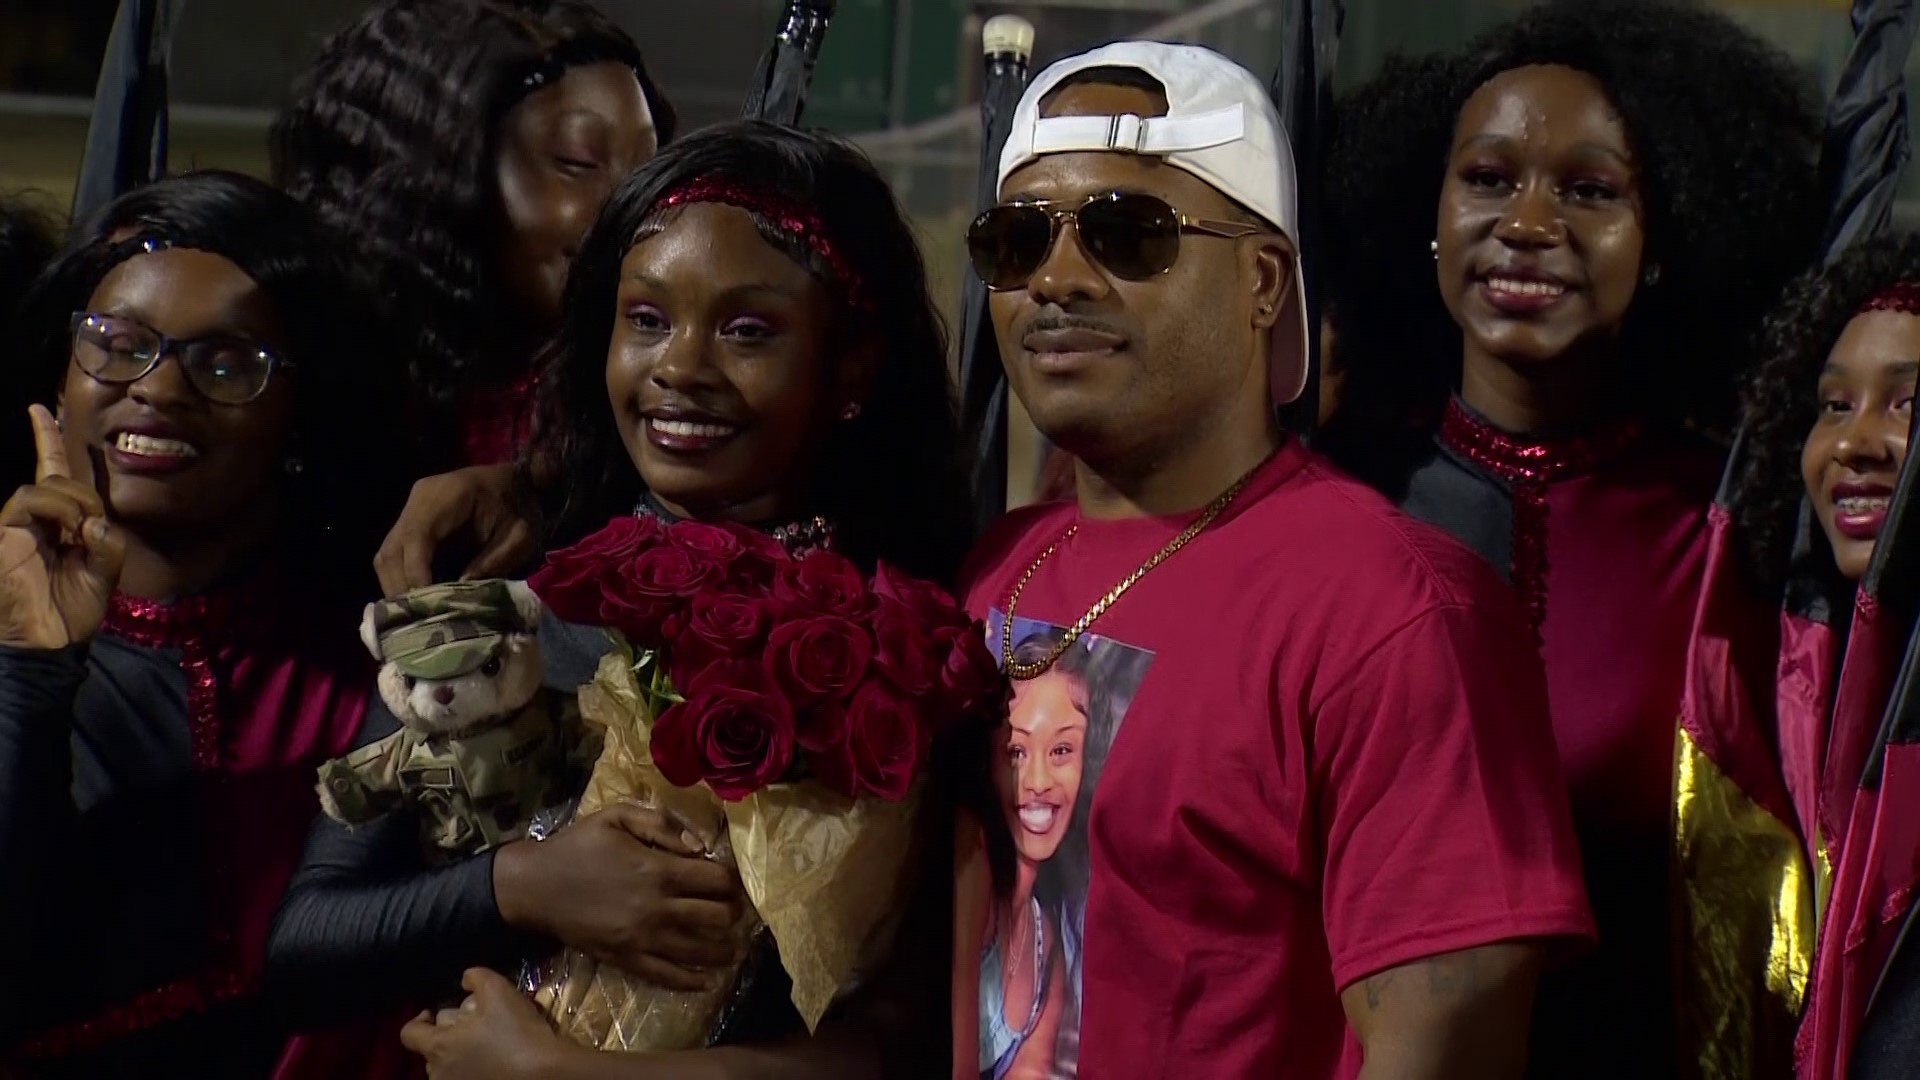 At Cedar Hill's Friday night football game, Sgt. 1st Class Kathan Morgan surprise-reunited with his daughter Cassara after her dance team wrapped their halftime show